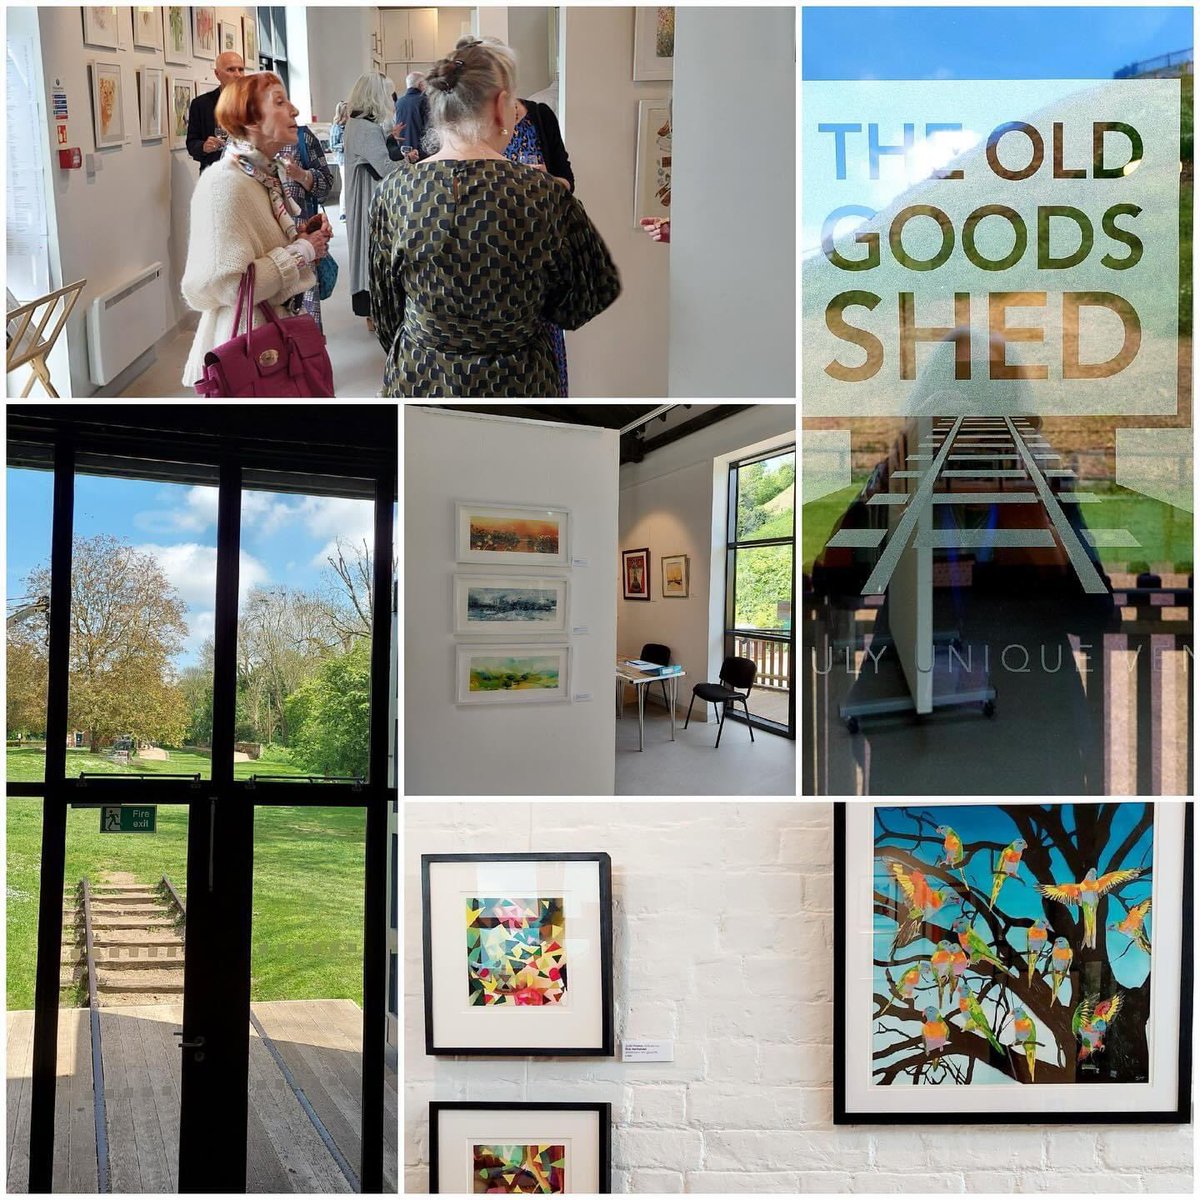 The new exhibition of the Society of East Anglian Watercolourists - SEAW is now open and showcasing some beautiful works of art at The Old Goods Shed, Clare Castle Country Park.

Entry is free and the exhibition runs every day until Sunday 19th May, from 10.30am to 4.30pm.